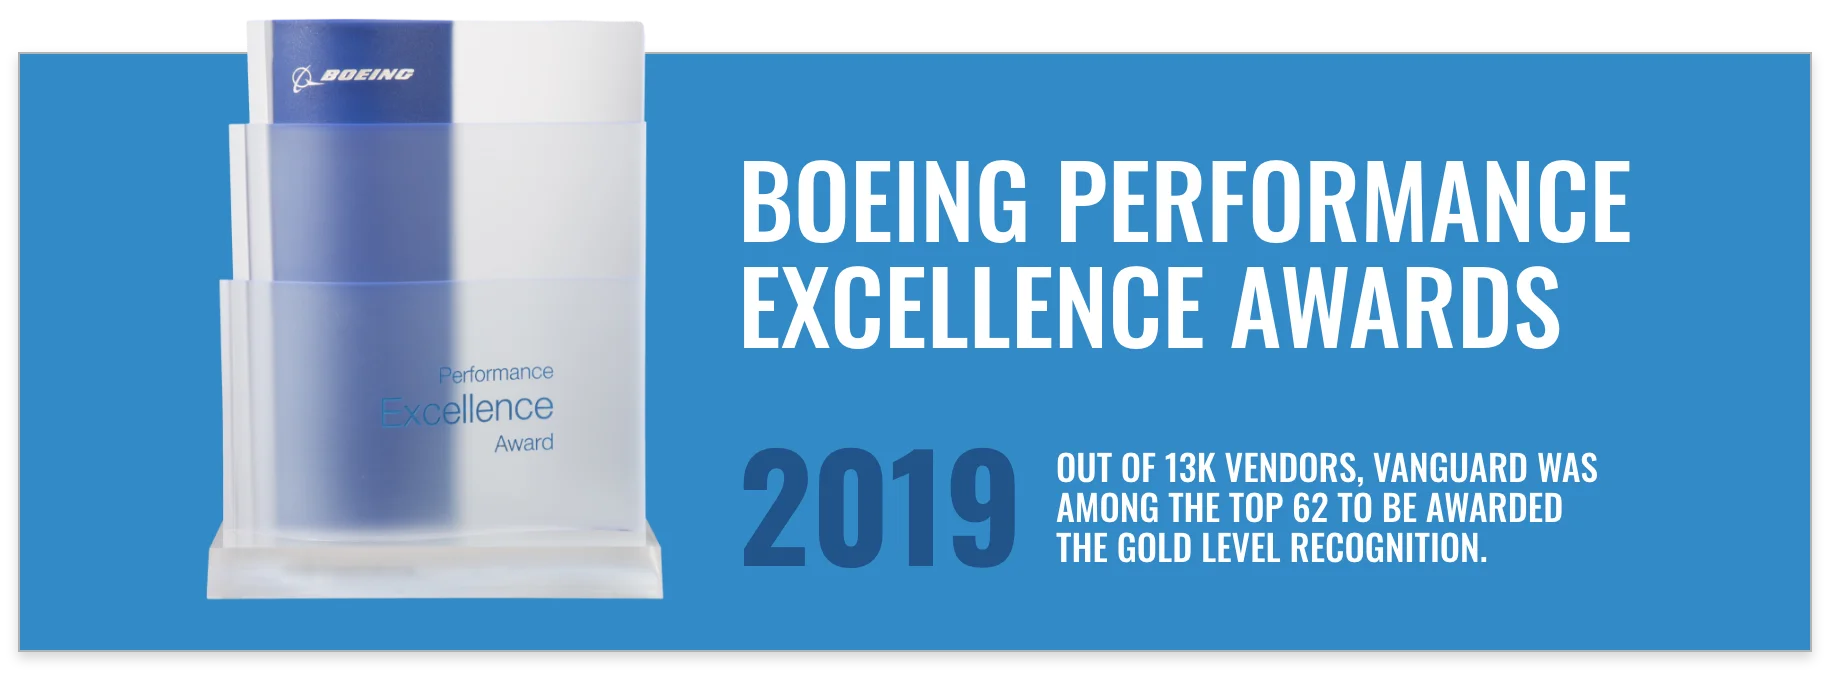 Boeing Performance Excellence Award 2019 